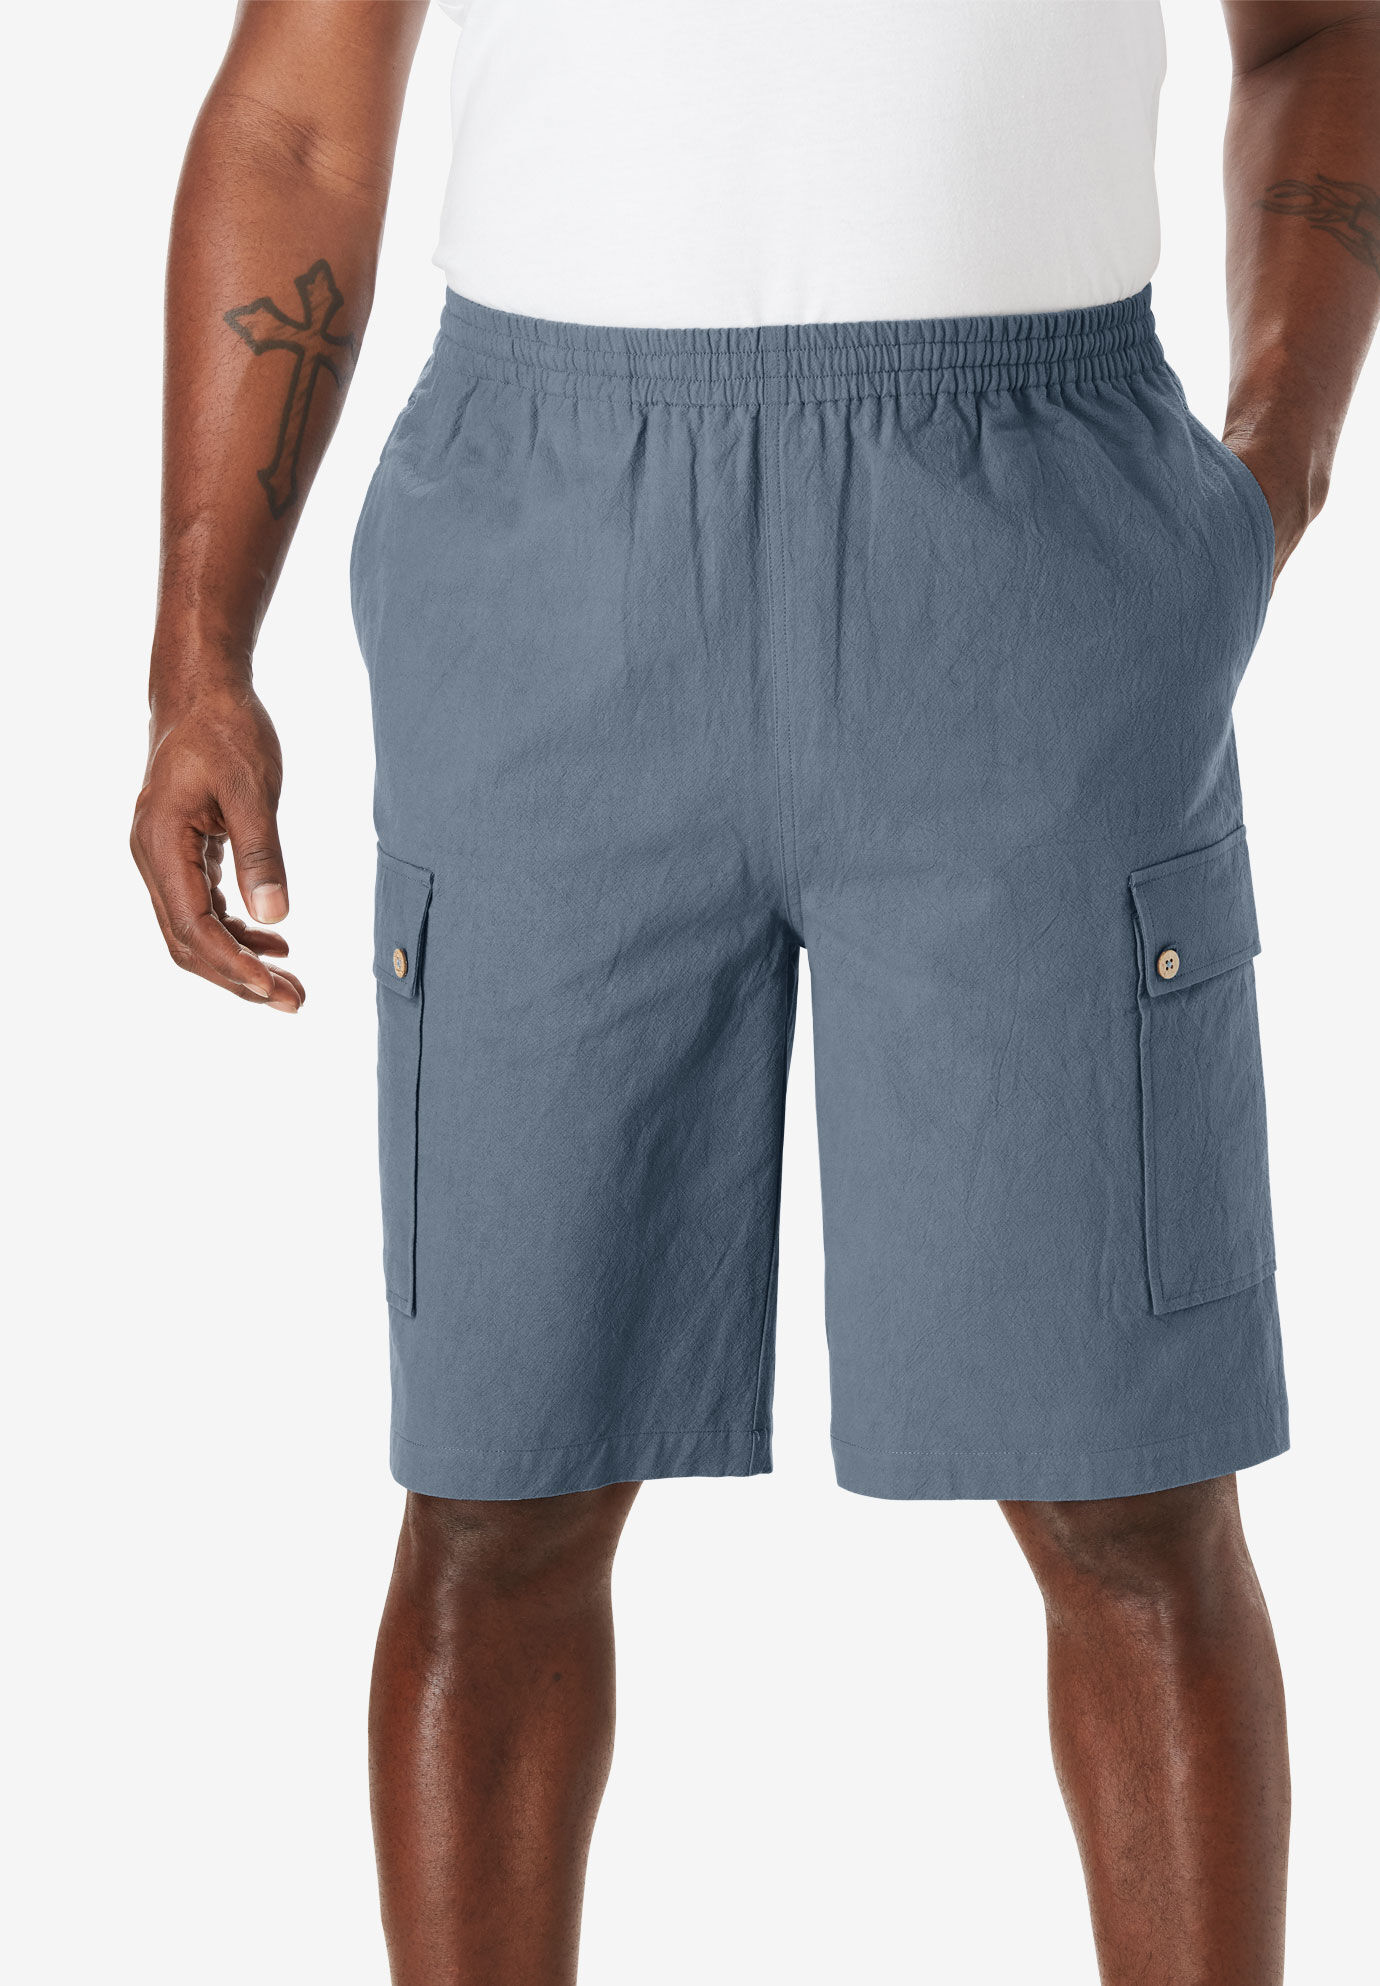 30 Minute Tall Workout Shorts for Build Muscle